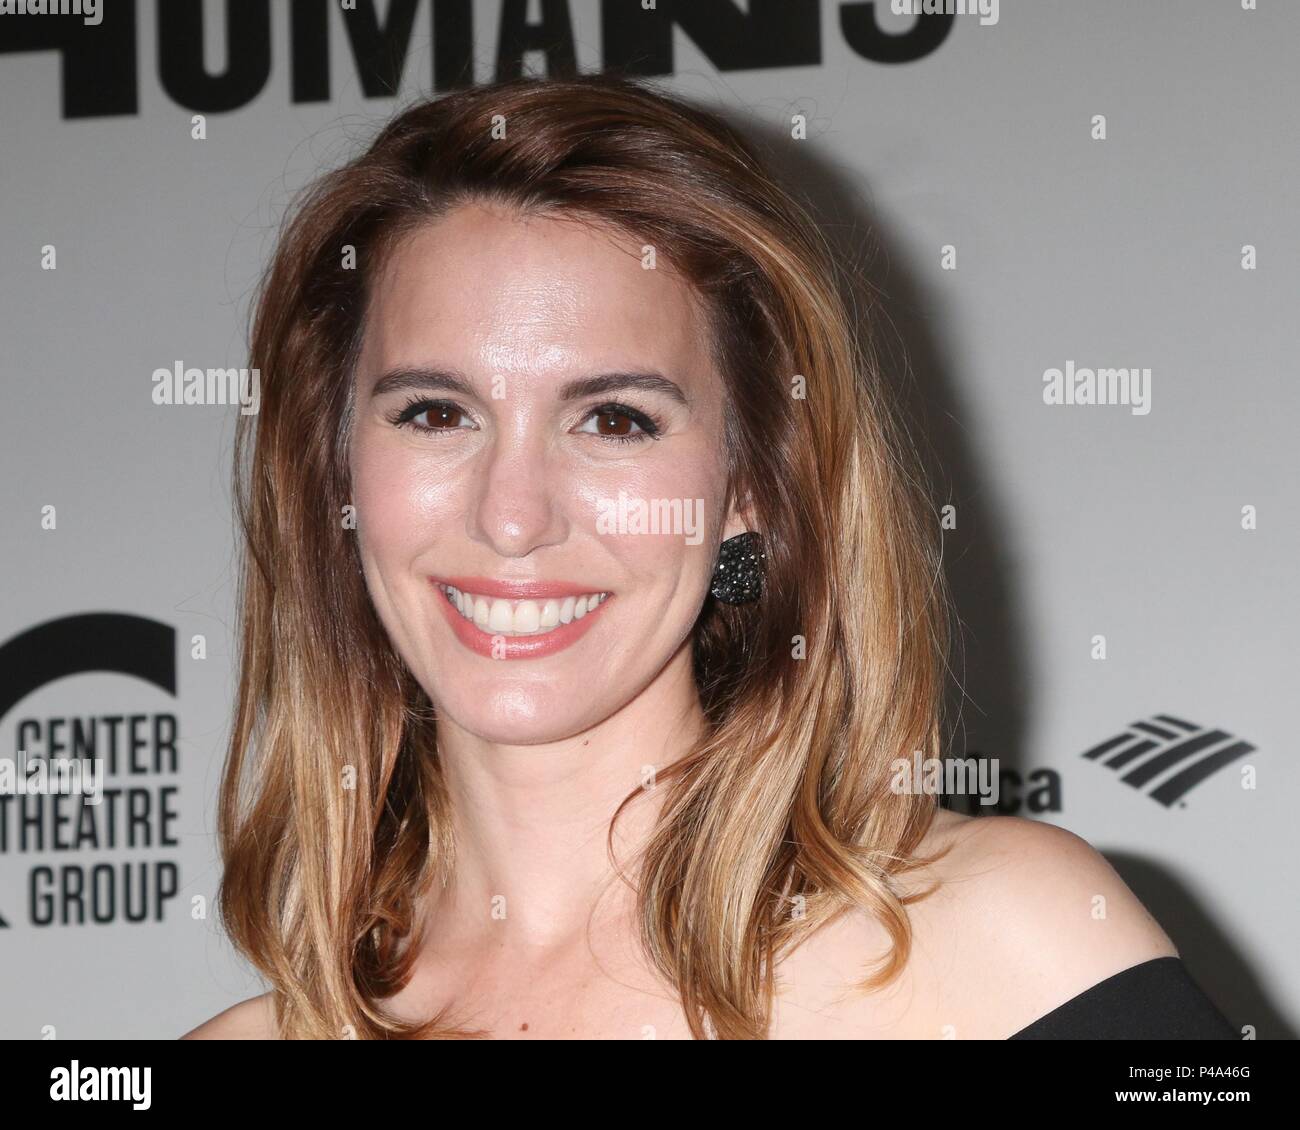 Los Angeles, CA, USA. 20th June, 2018. Christy Carlson Romano at arrivals for THE HUMANS Opening Night, Center Theatre Group - Ahmanson Theatre, Los Angeles, CA June 20, 2018. Credit: Priscilla Grant/Everett Collection/Alamy Live News Stock Photo